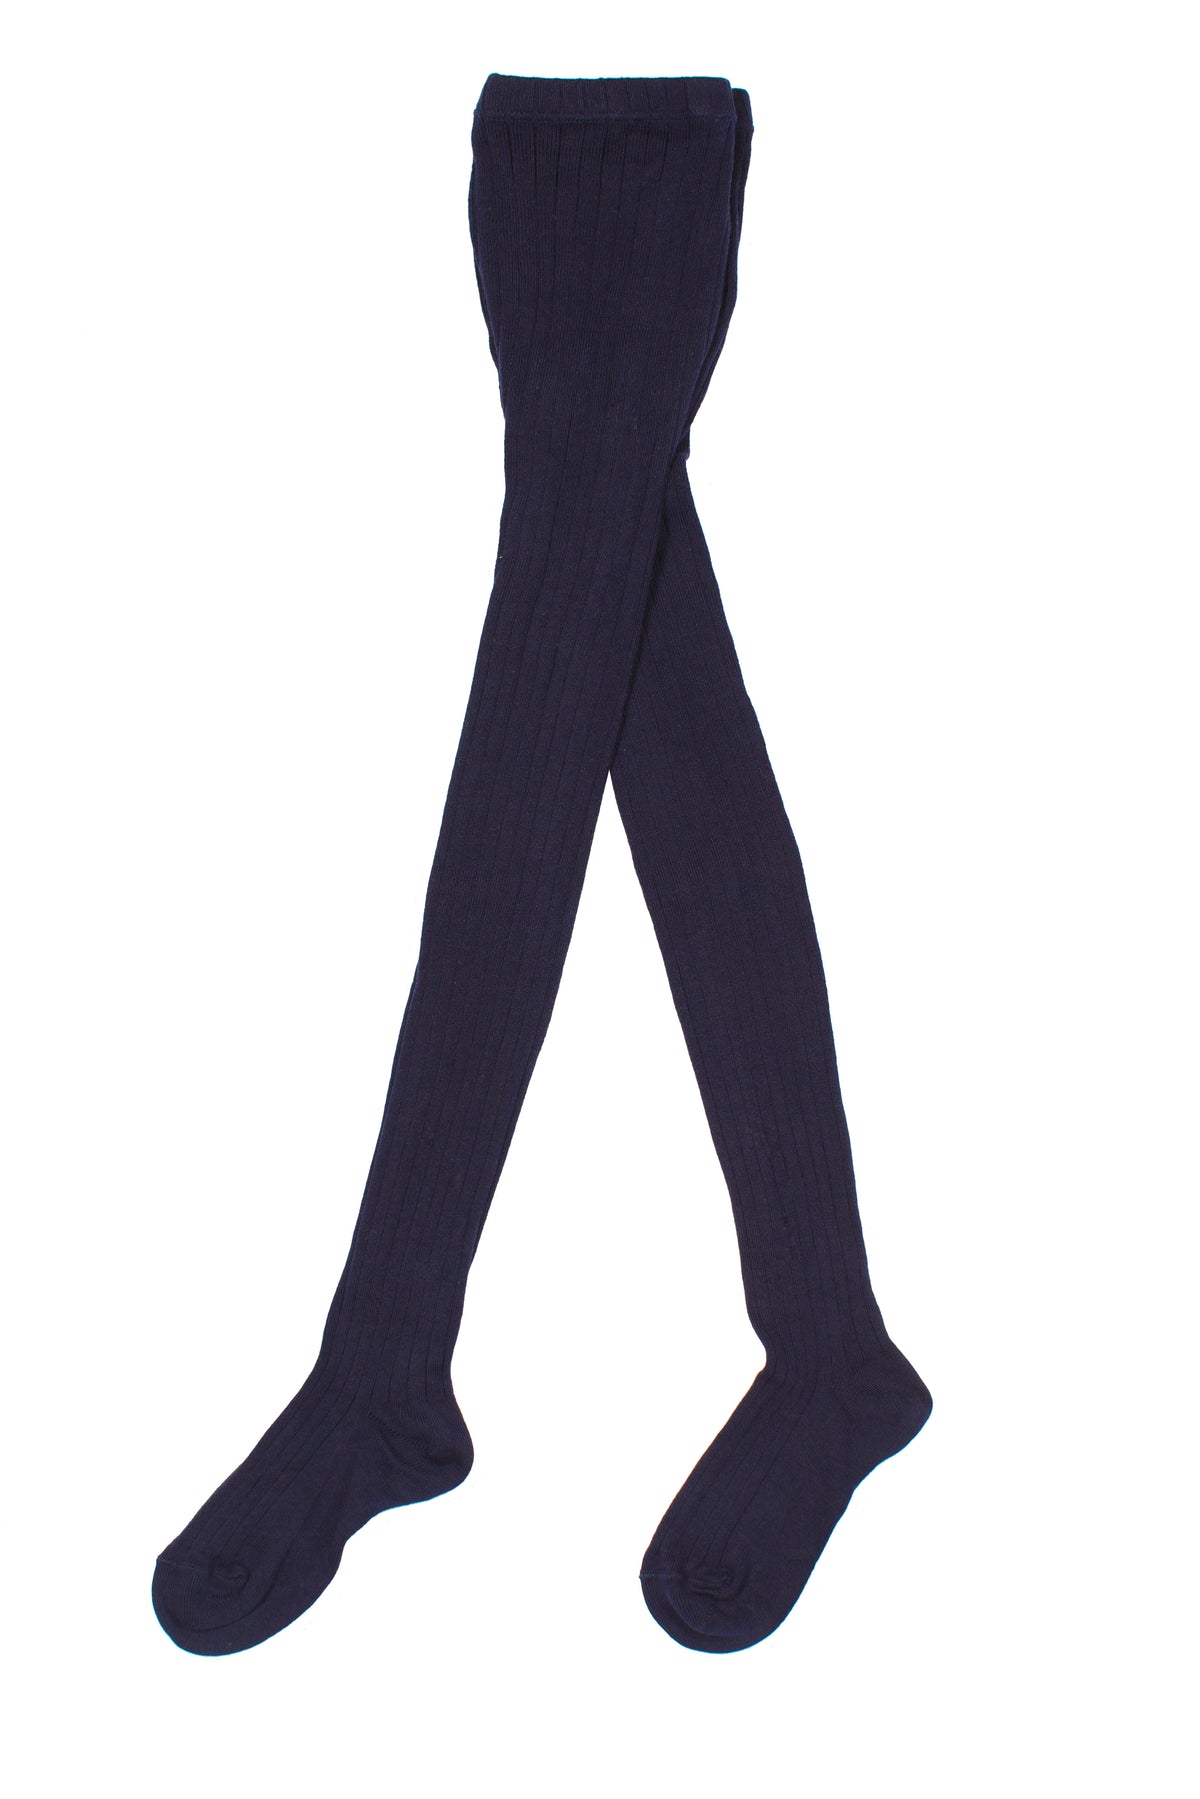 Cotton ribbed tights - French Navy